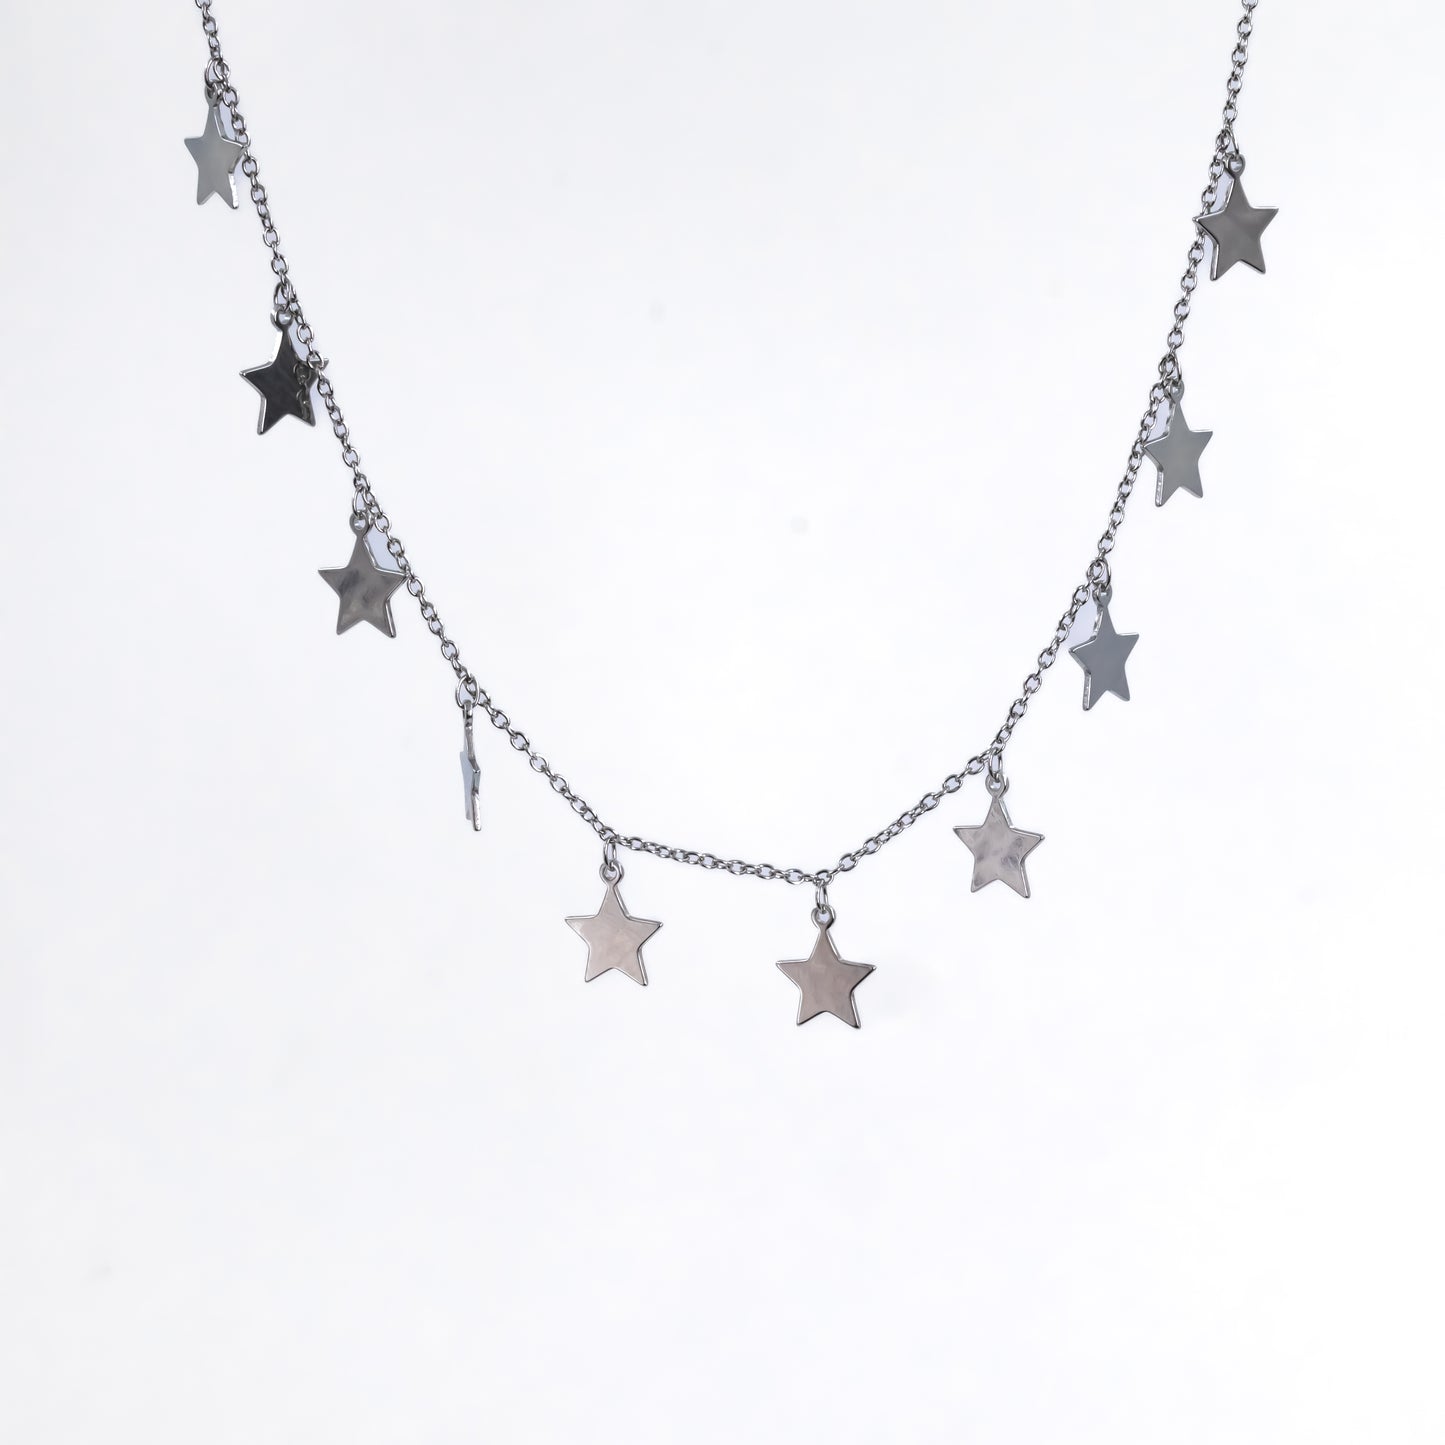 Silver Starry Charm Chain